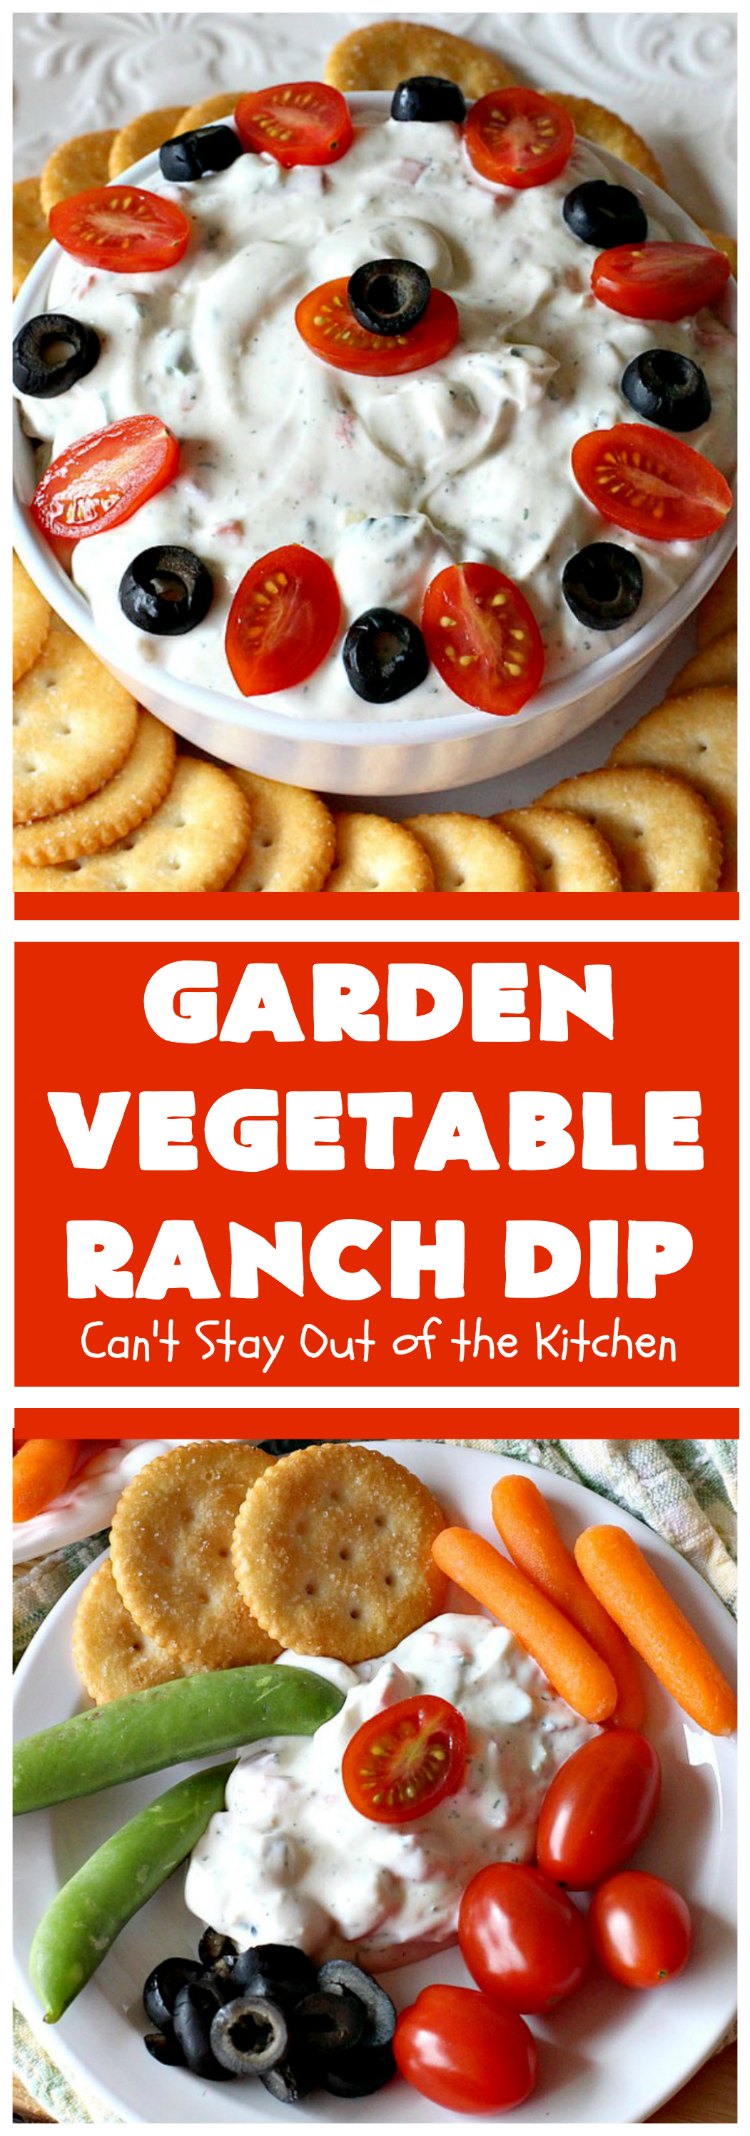 Garden Vegetable Ranch Dip | Can't Stay Out of the Kitchen | this quick & easy 6-ingredient #recipe is the perfect dip for #tailgating parties, potlucks or the #SuperBowl! You can whip this up in 5 minutes. Our company raved over this delicious  #appetizer. Includes #RanchDressingMix, #olives & #tomatoes. #HiddenVallenRanchDressingMix #holiday #HolidayAppetizer #GardenVegetableRanchDip